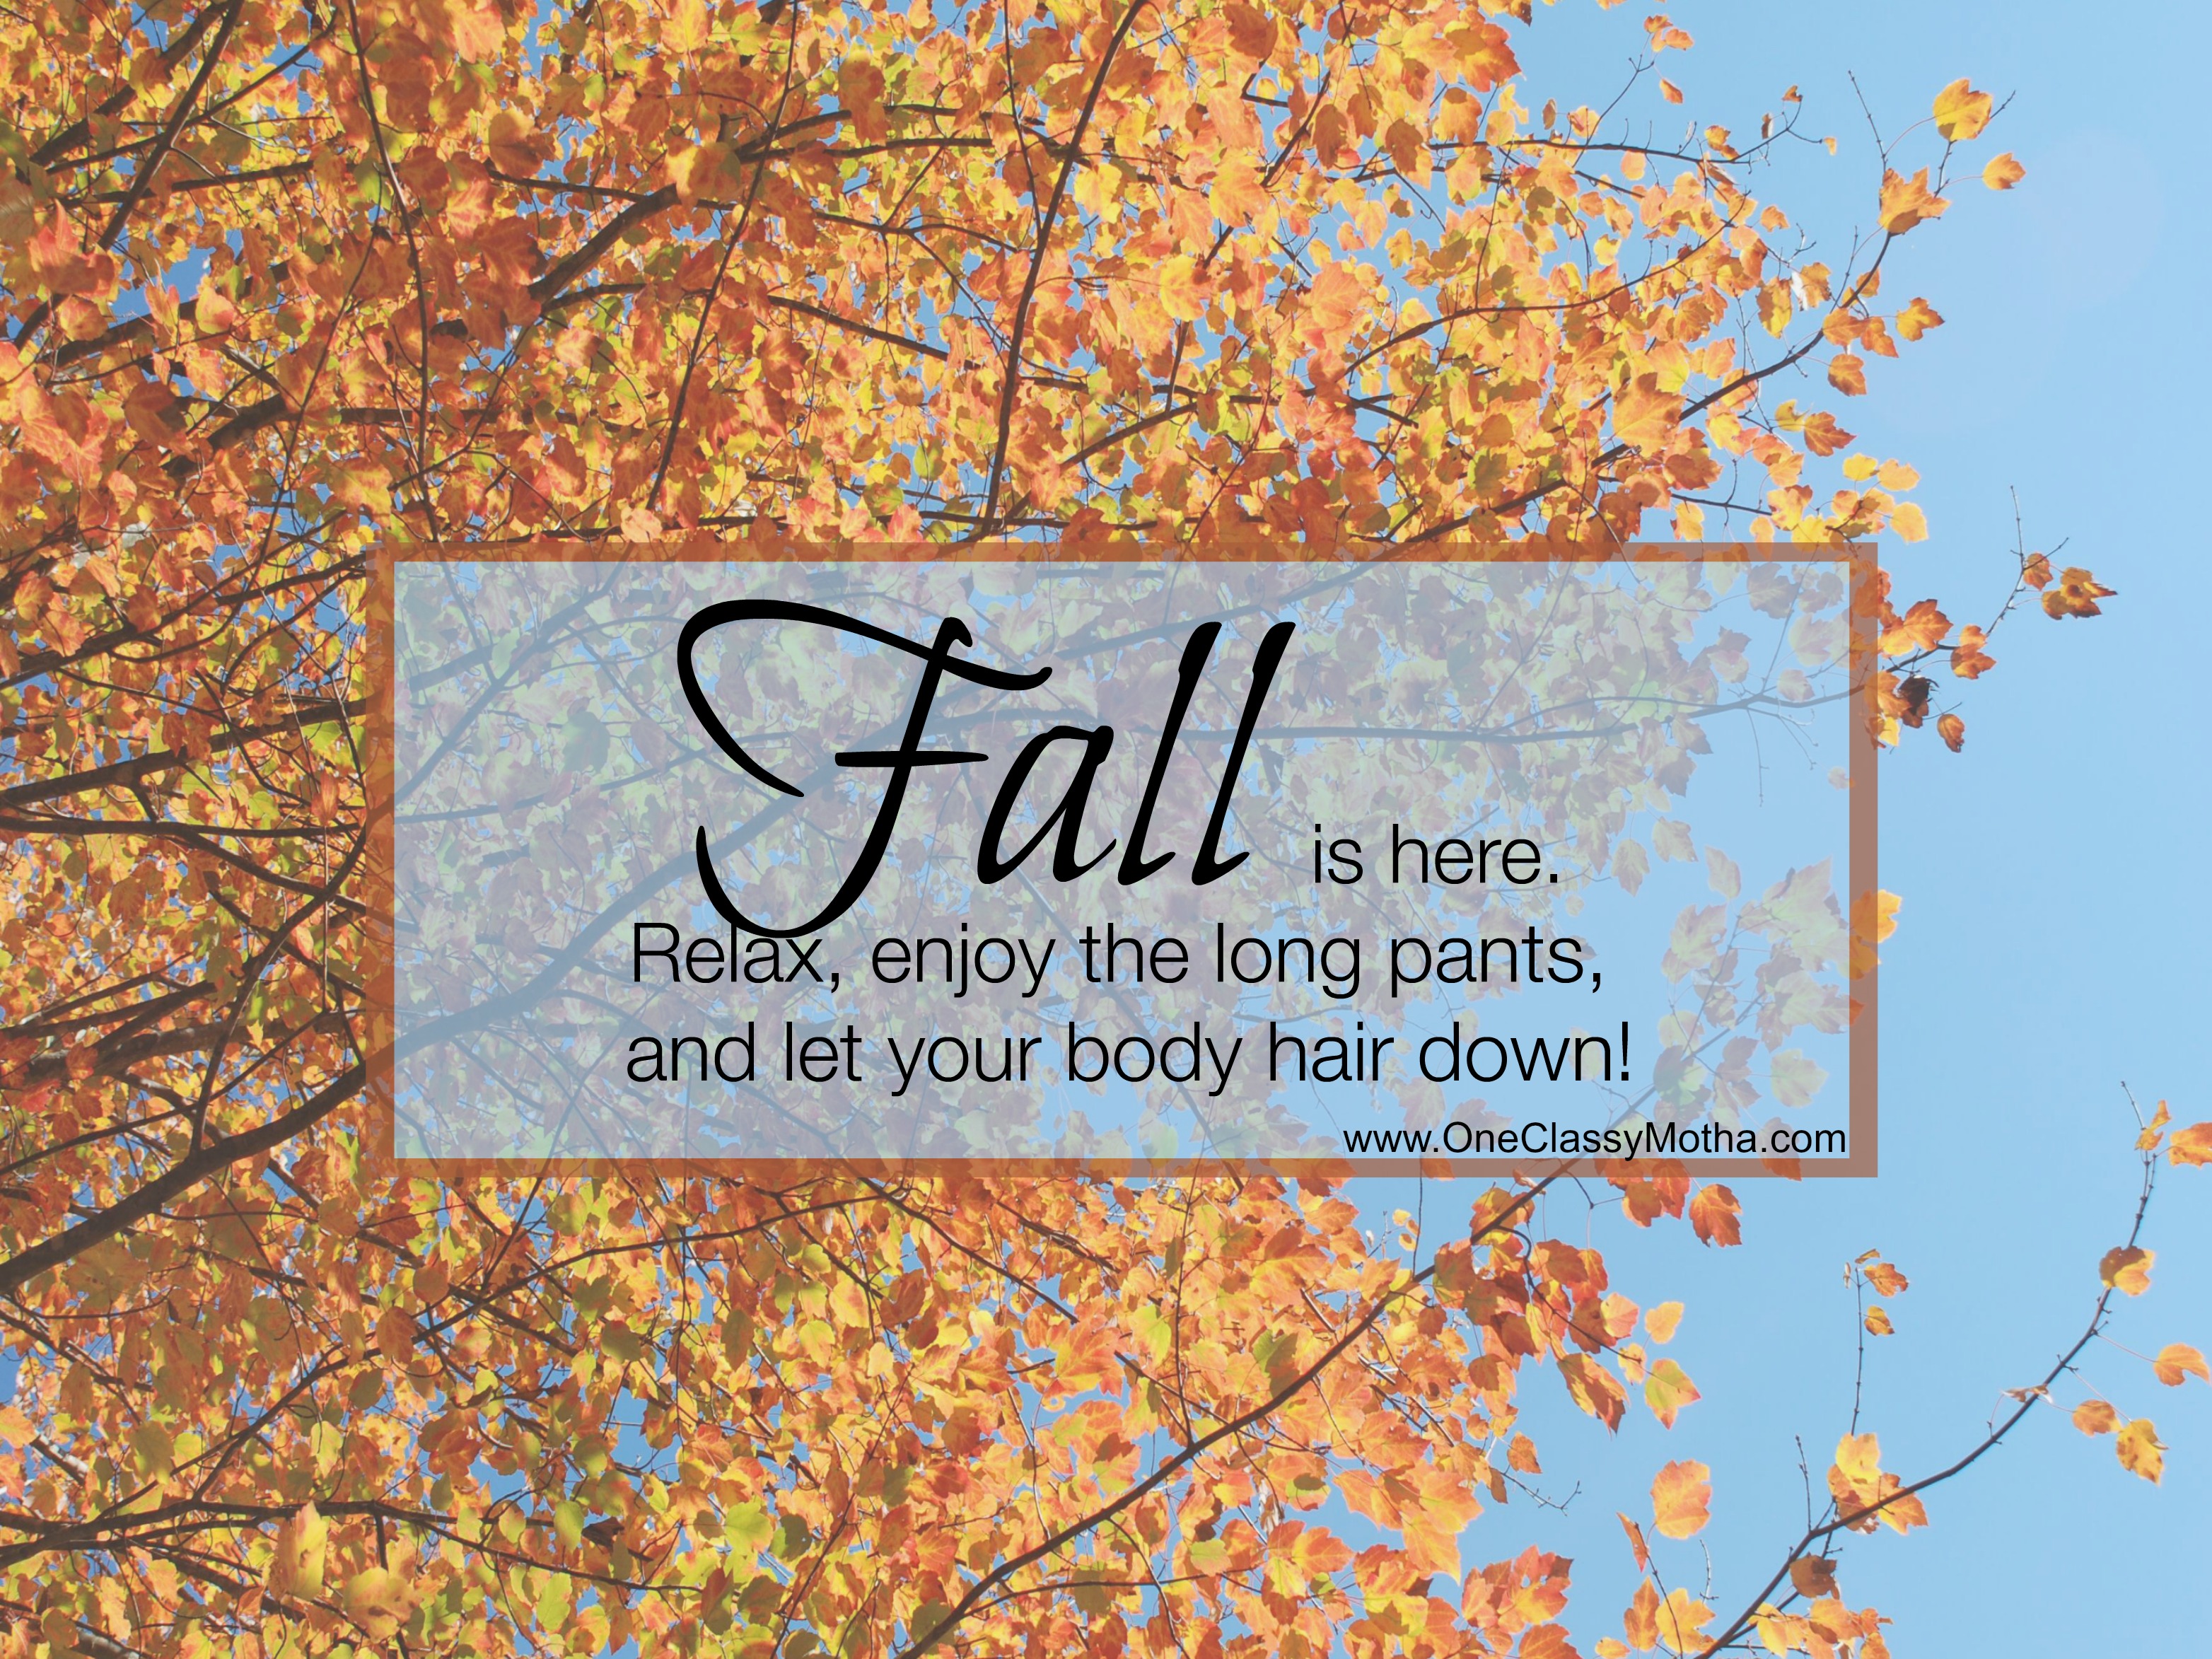 Dear Ladies, Fall is here, relax and let your body hair down!